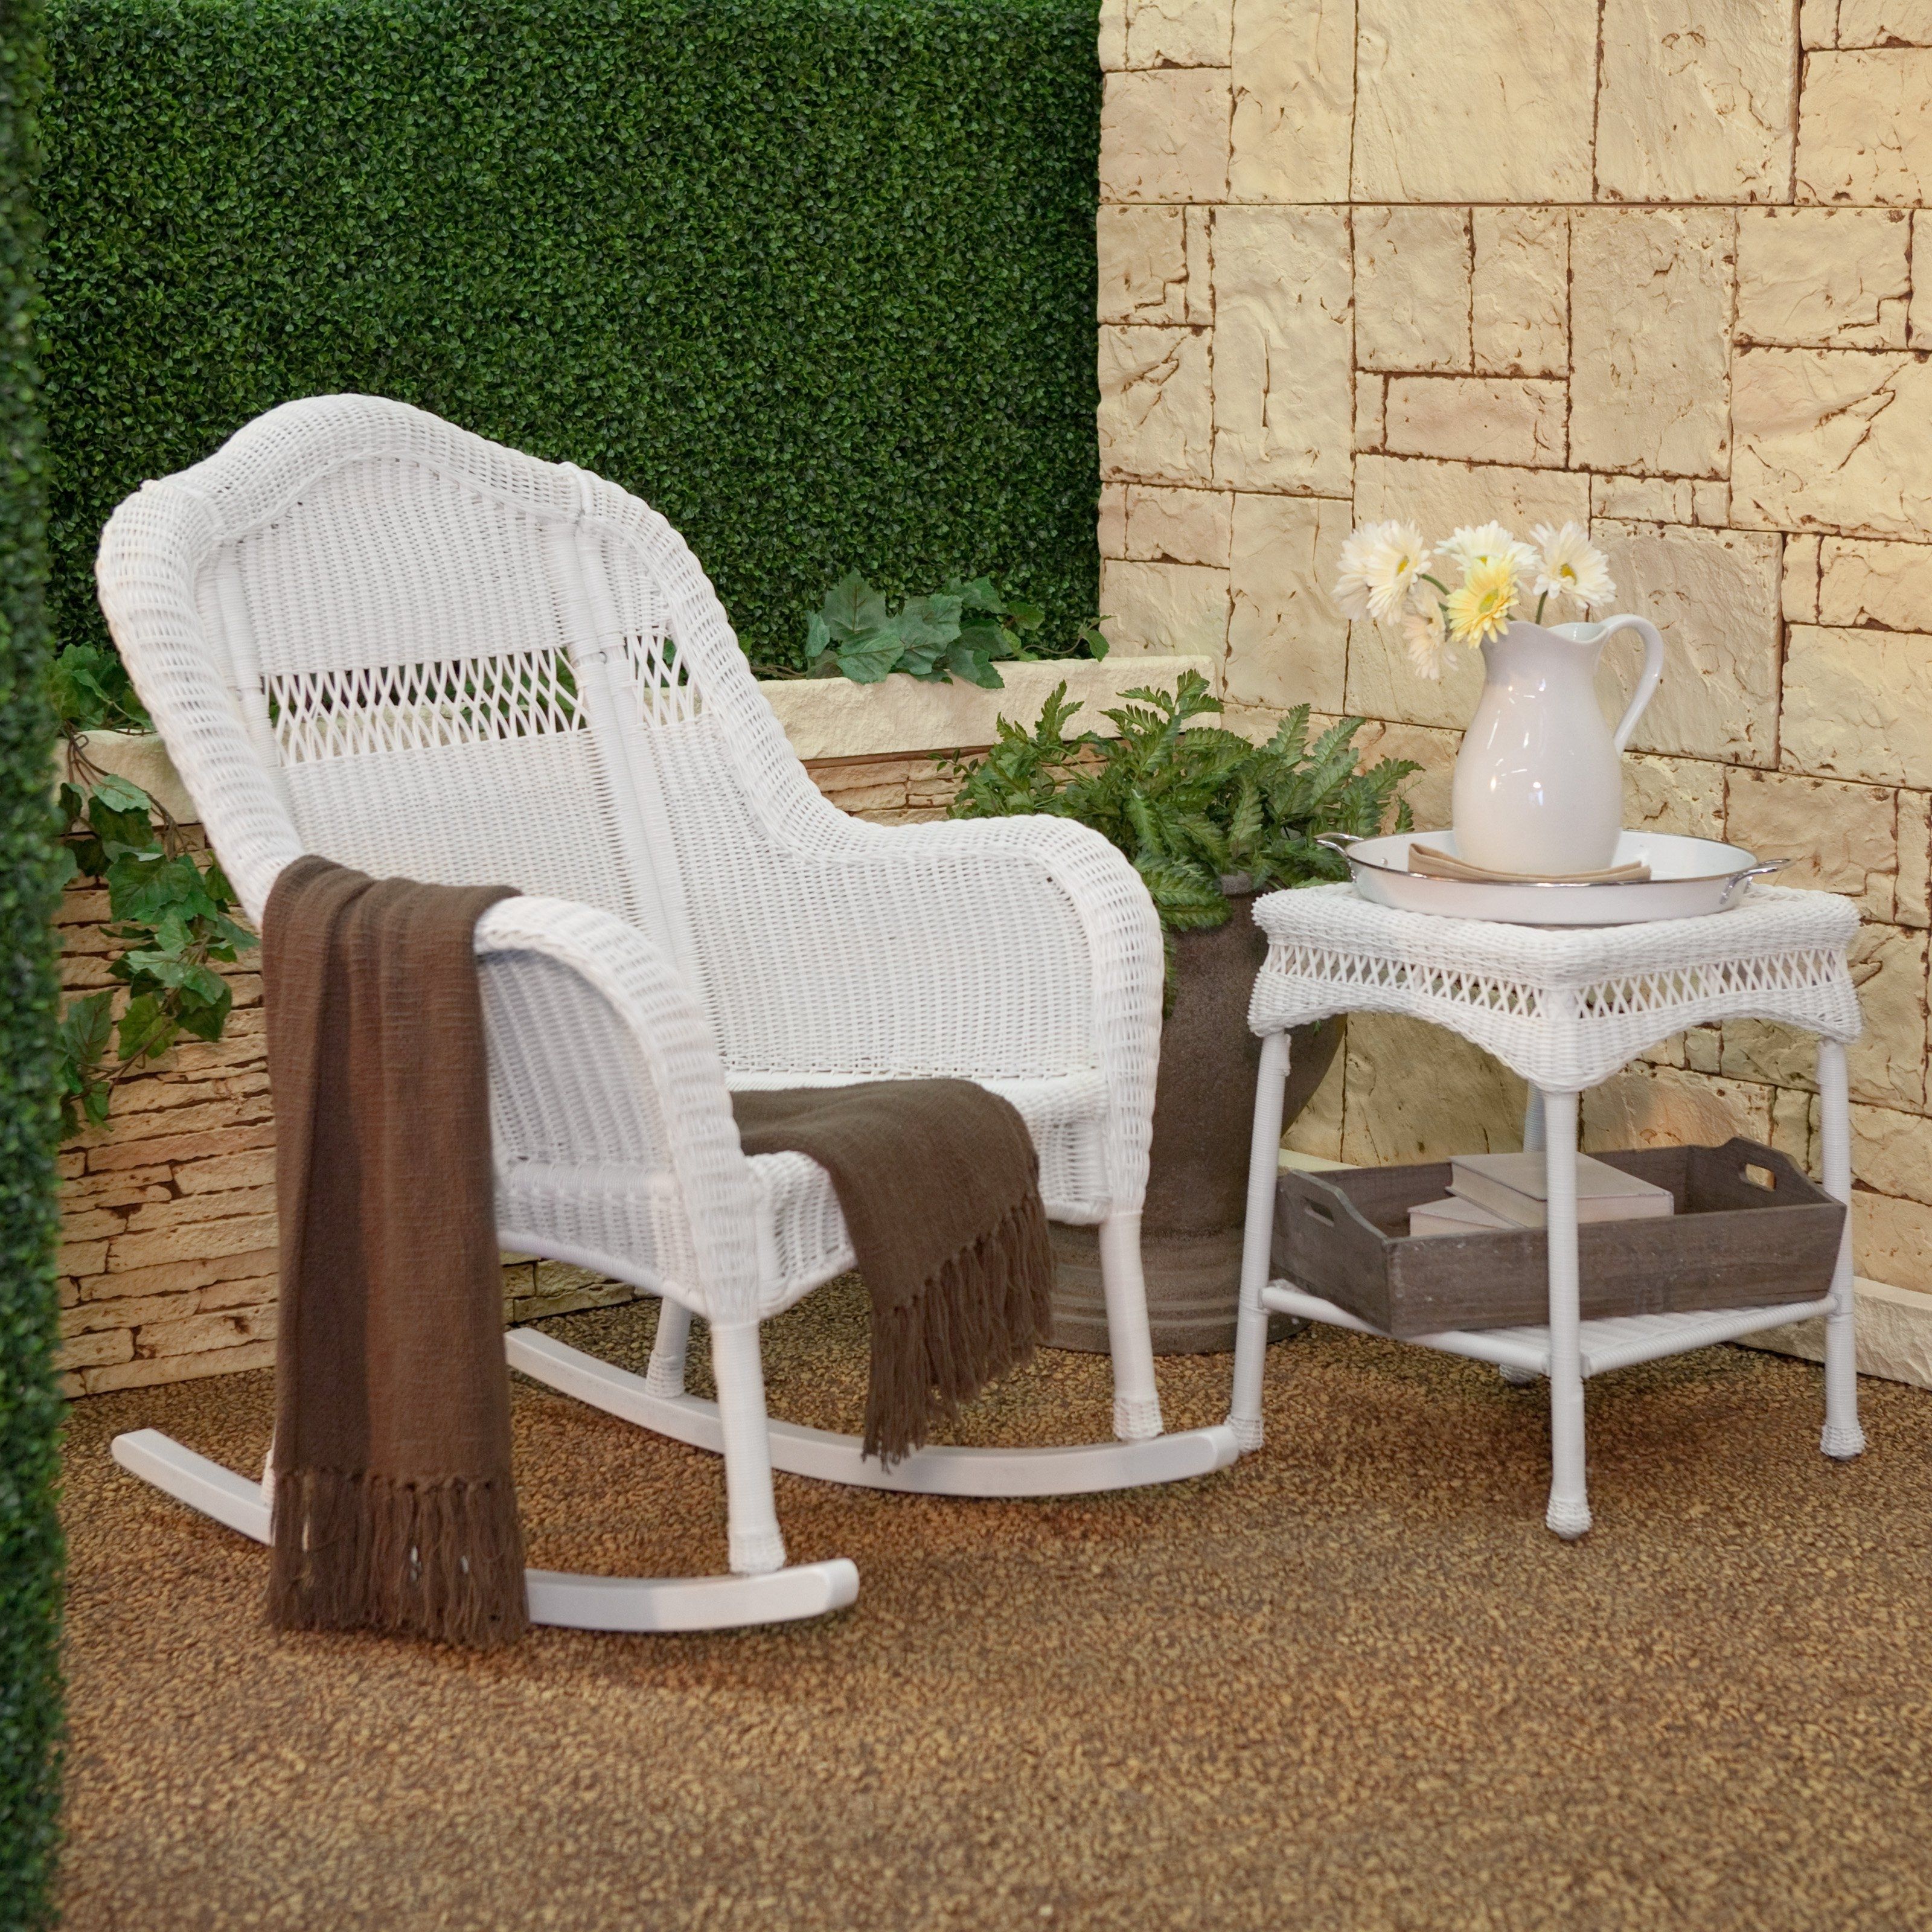 Rattan Glider Outdoor White Rocking Chairs Sale Plastic (View 10 of 15)